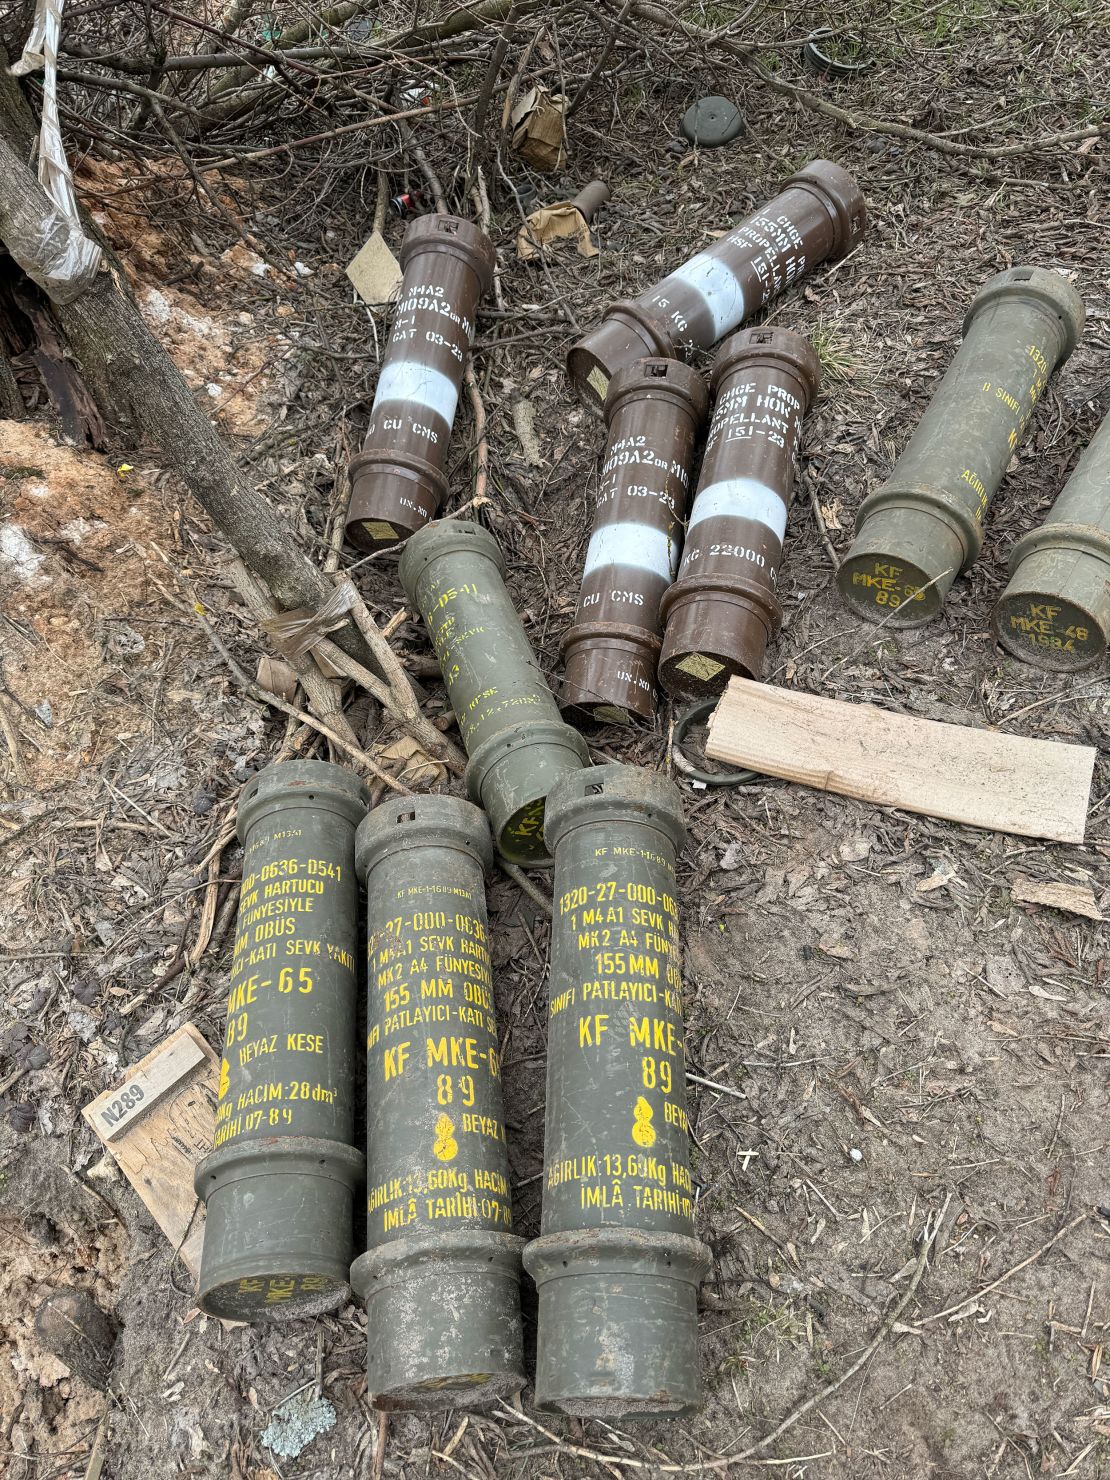 Ammunition canisters at a Ukrainian position along the frontline in eastern Ukraine.